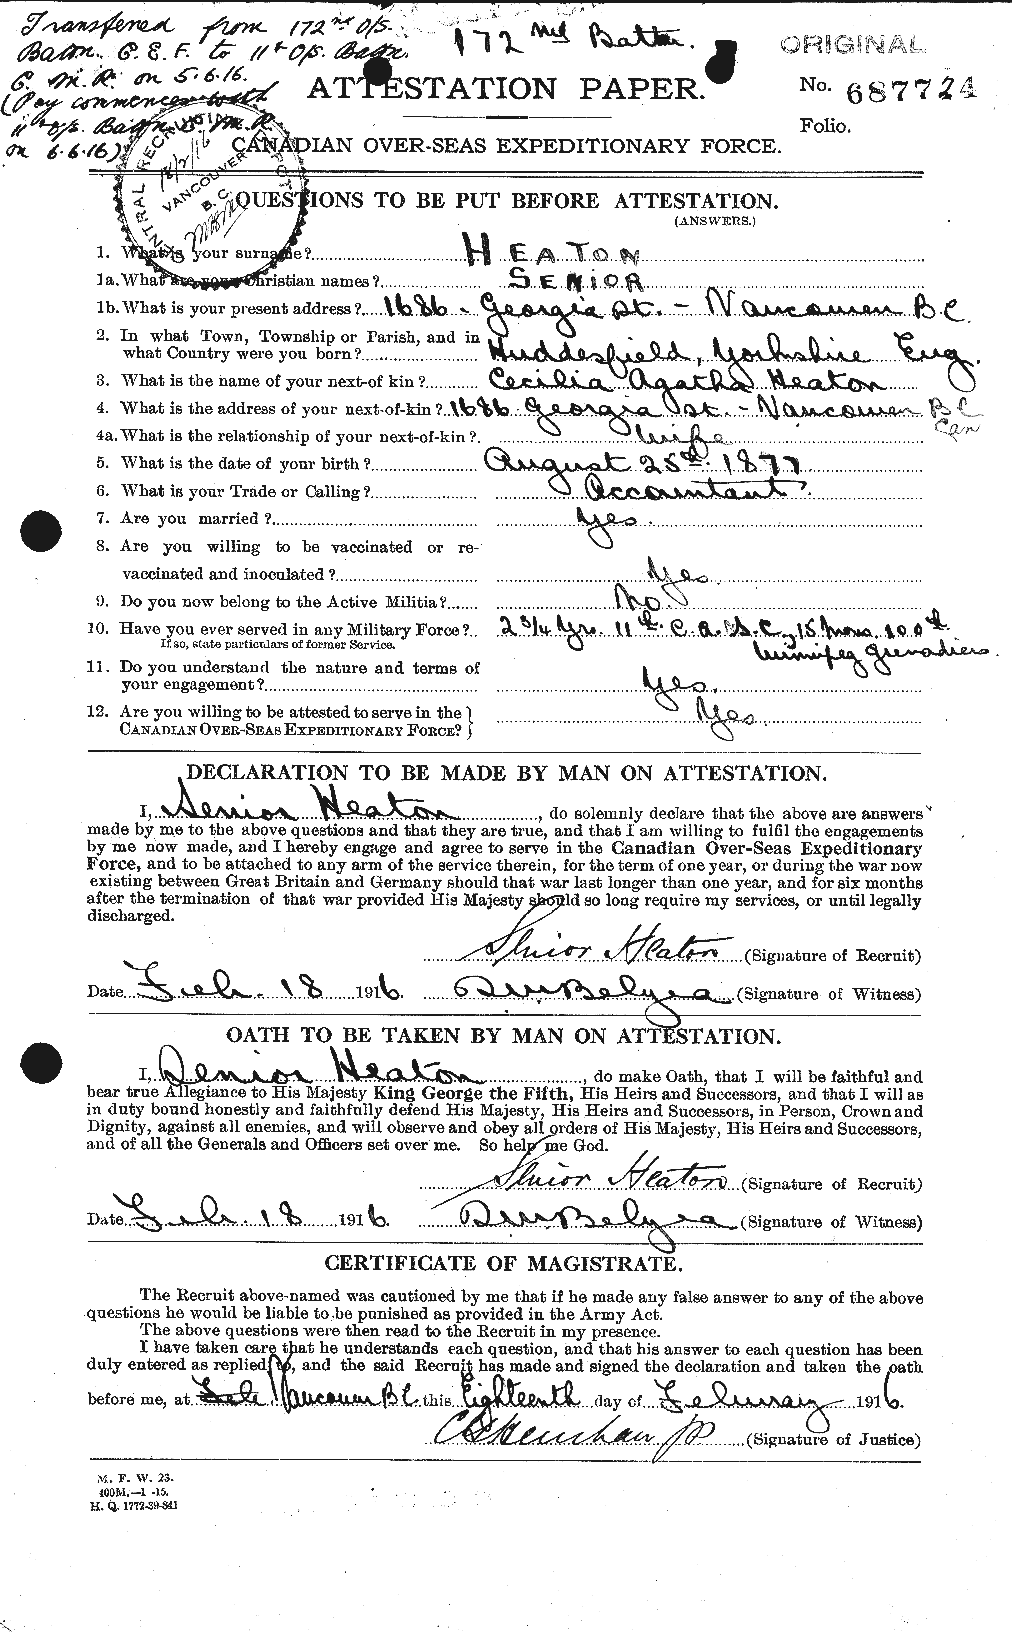 Personnel Records of the First World War - CEF 386469a